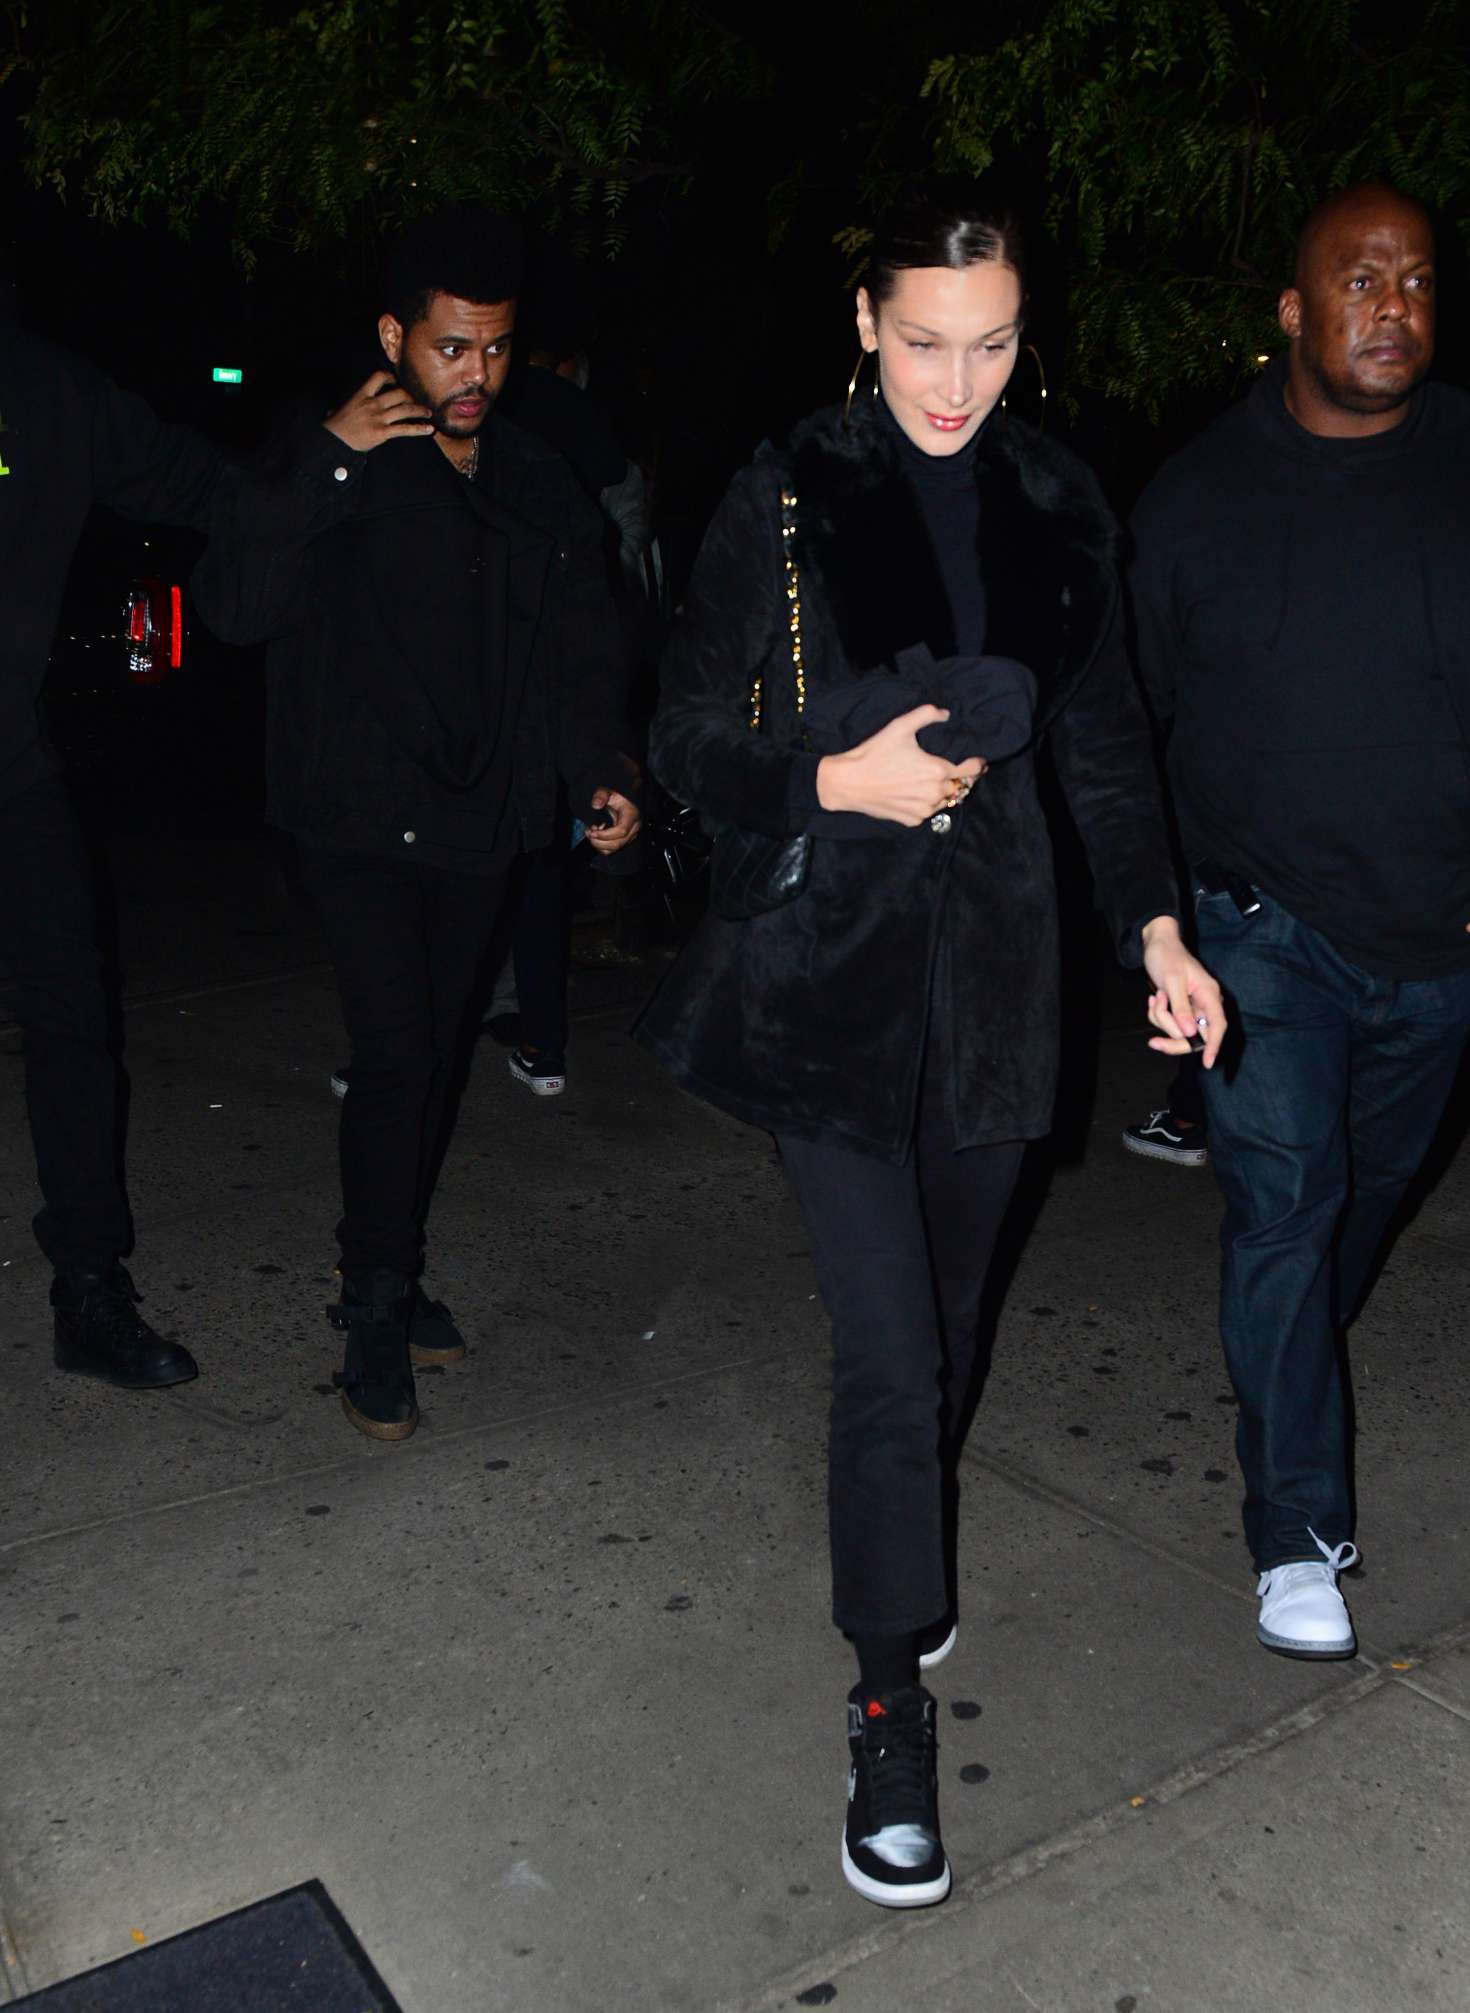 Bella Hadid 2018 : Bella Hadid and The Weeknd: Night out in New York City -03